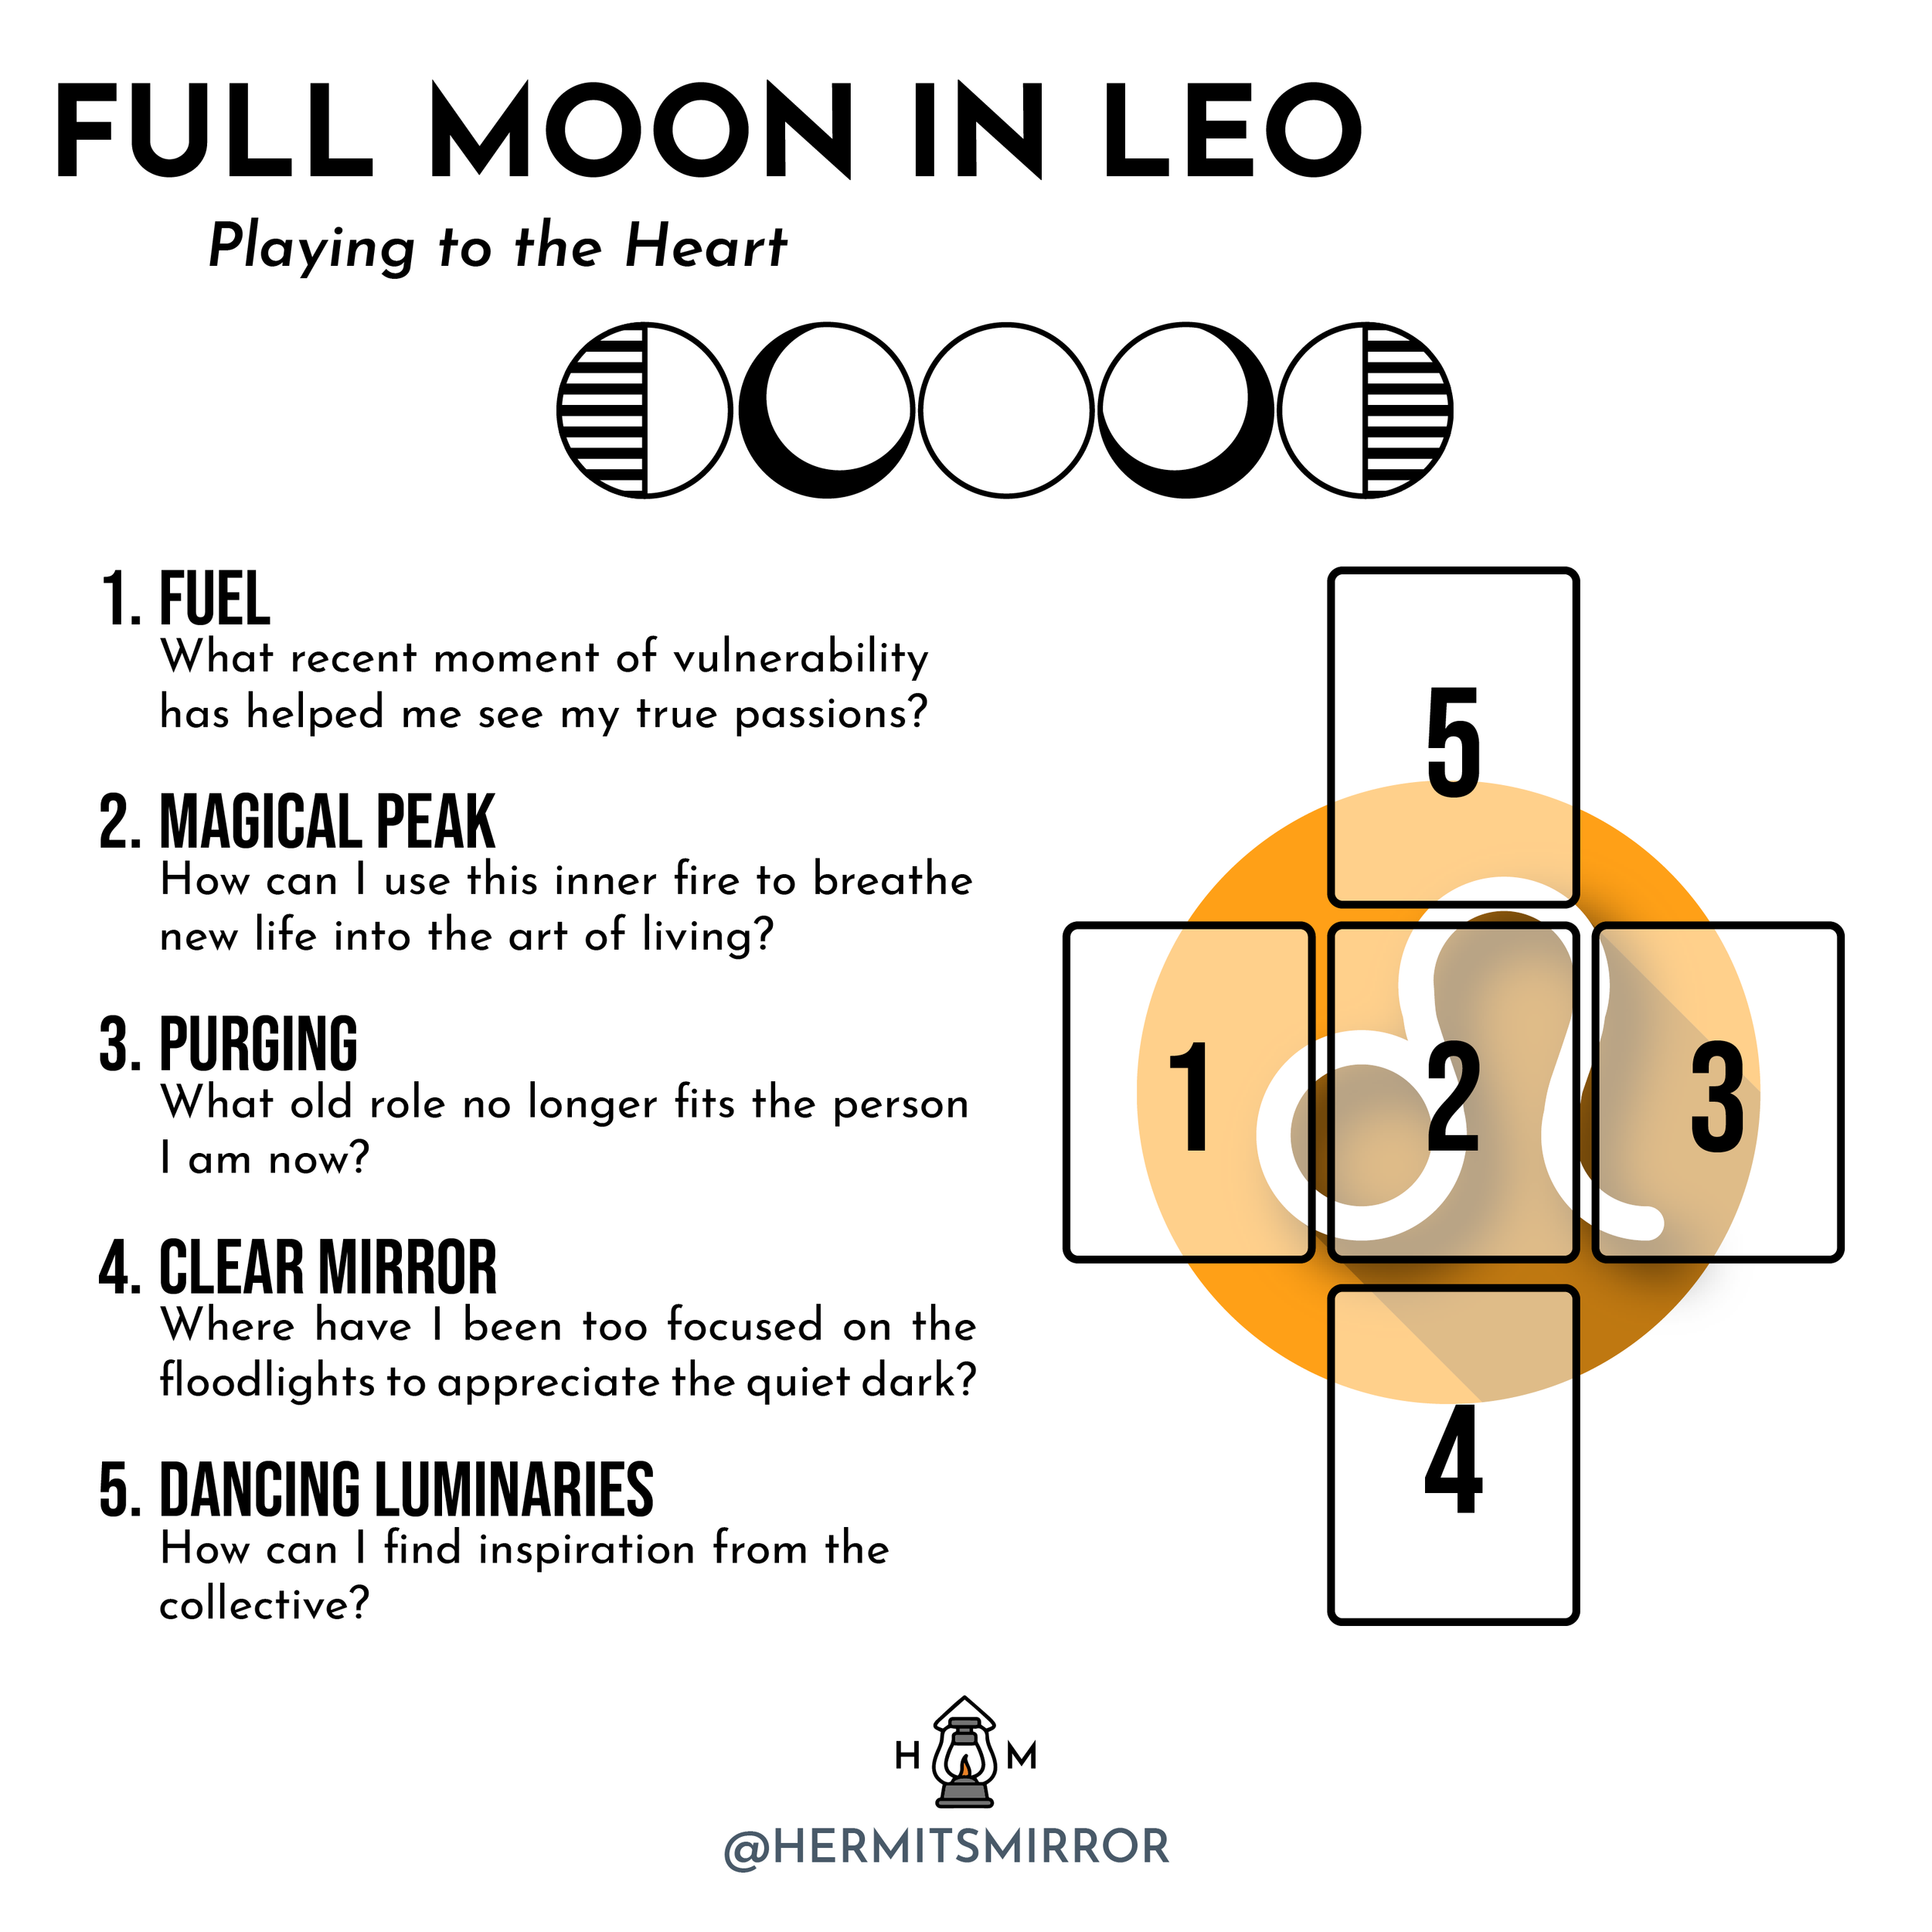 Must Have List Of Moon Reading Review Networks